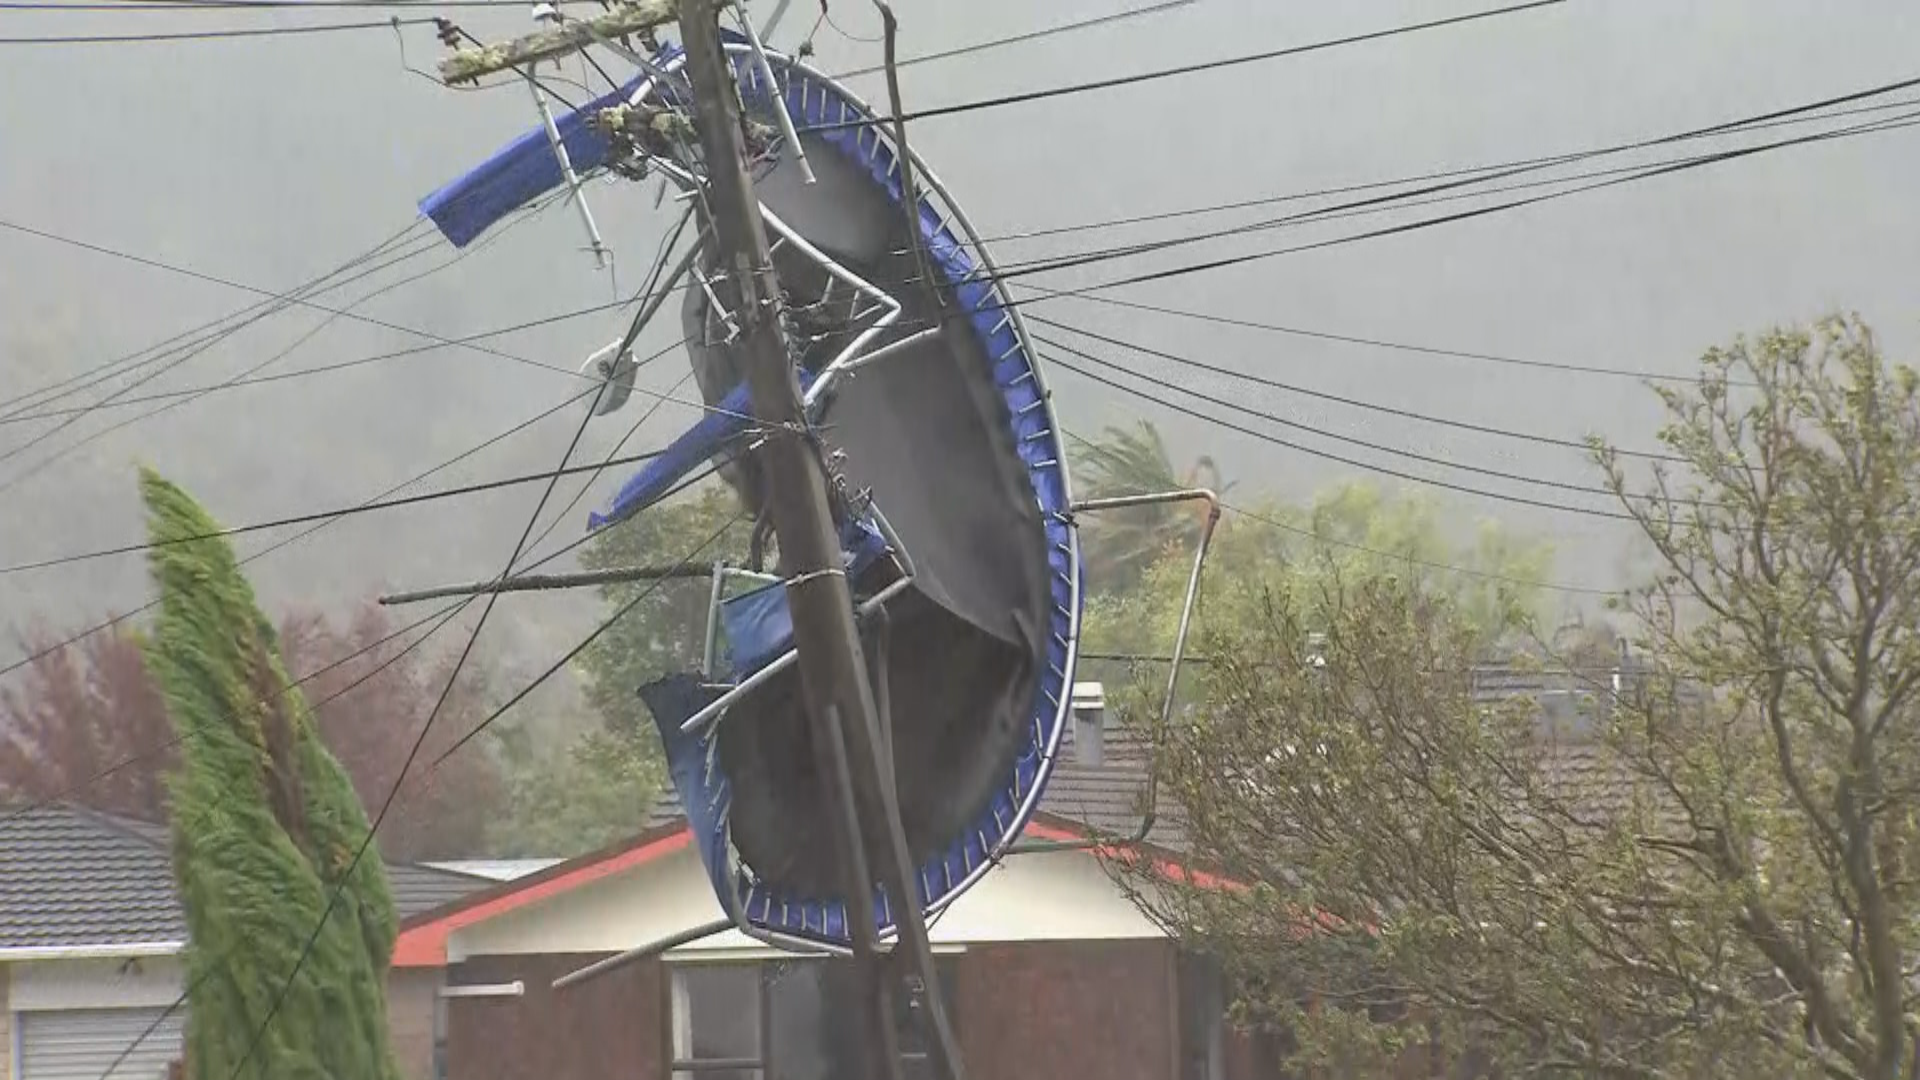 Flying trampoline damages power lines as wild weather slams Wellington